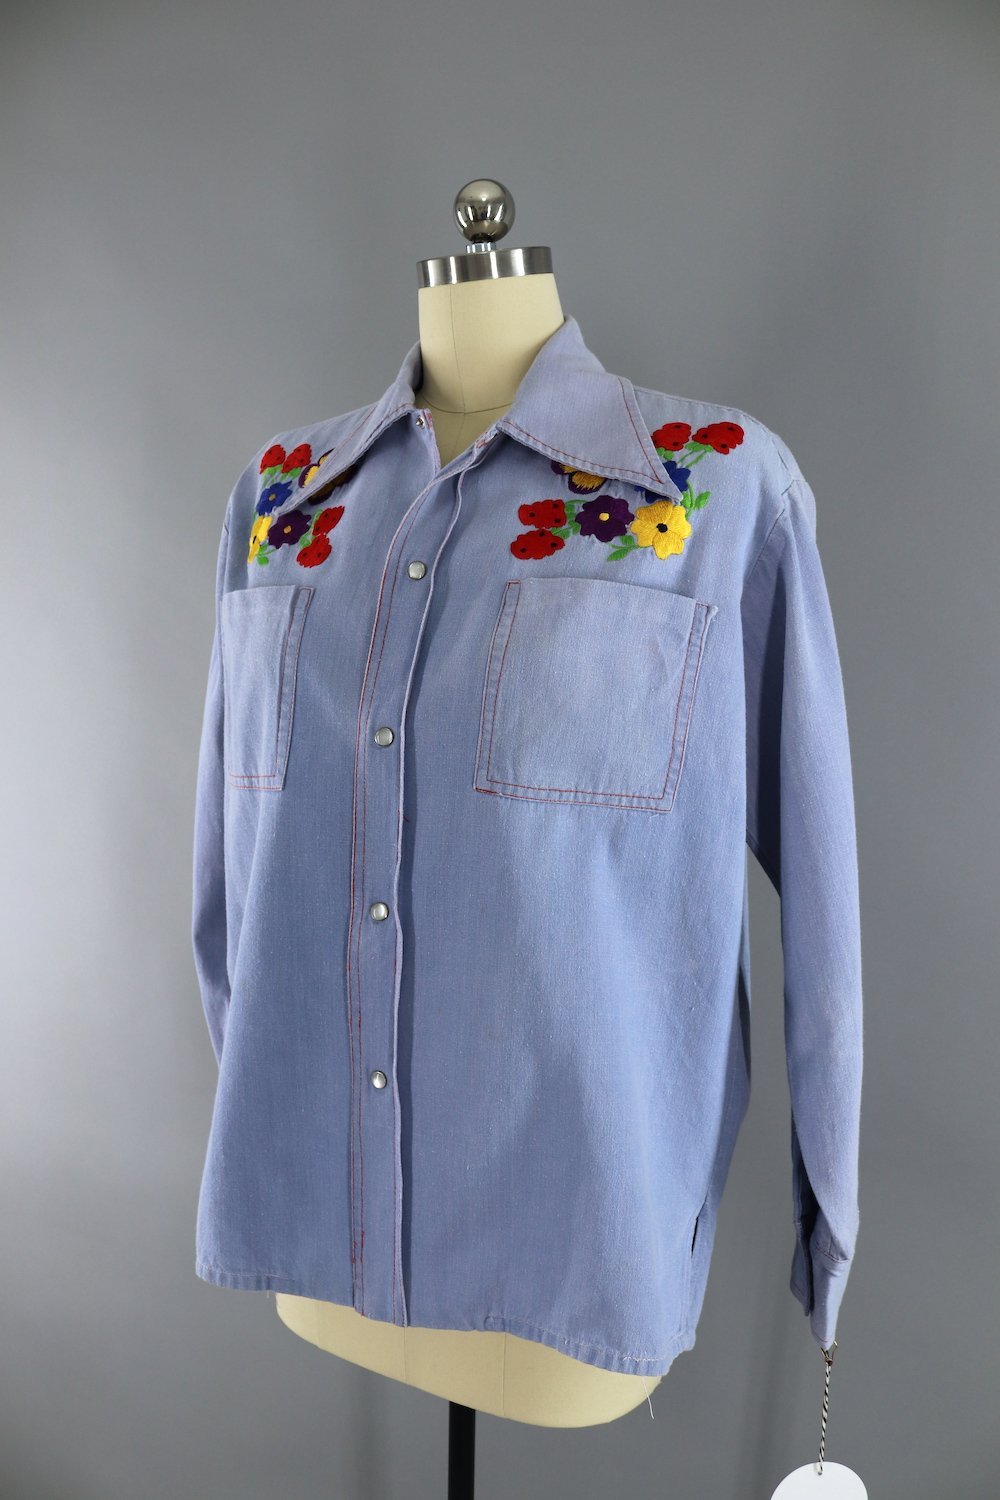 Vintage 1970s Embroidered Shirt / Blue Chambray Denim - ThisBlueBird